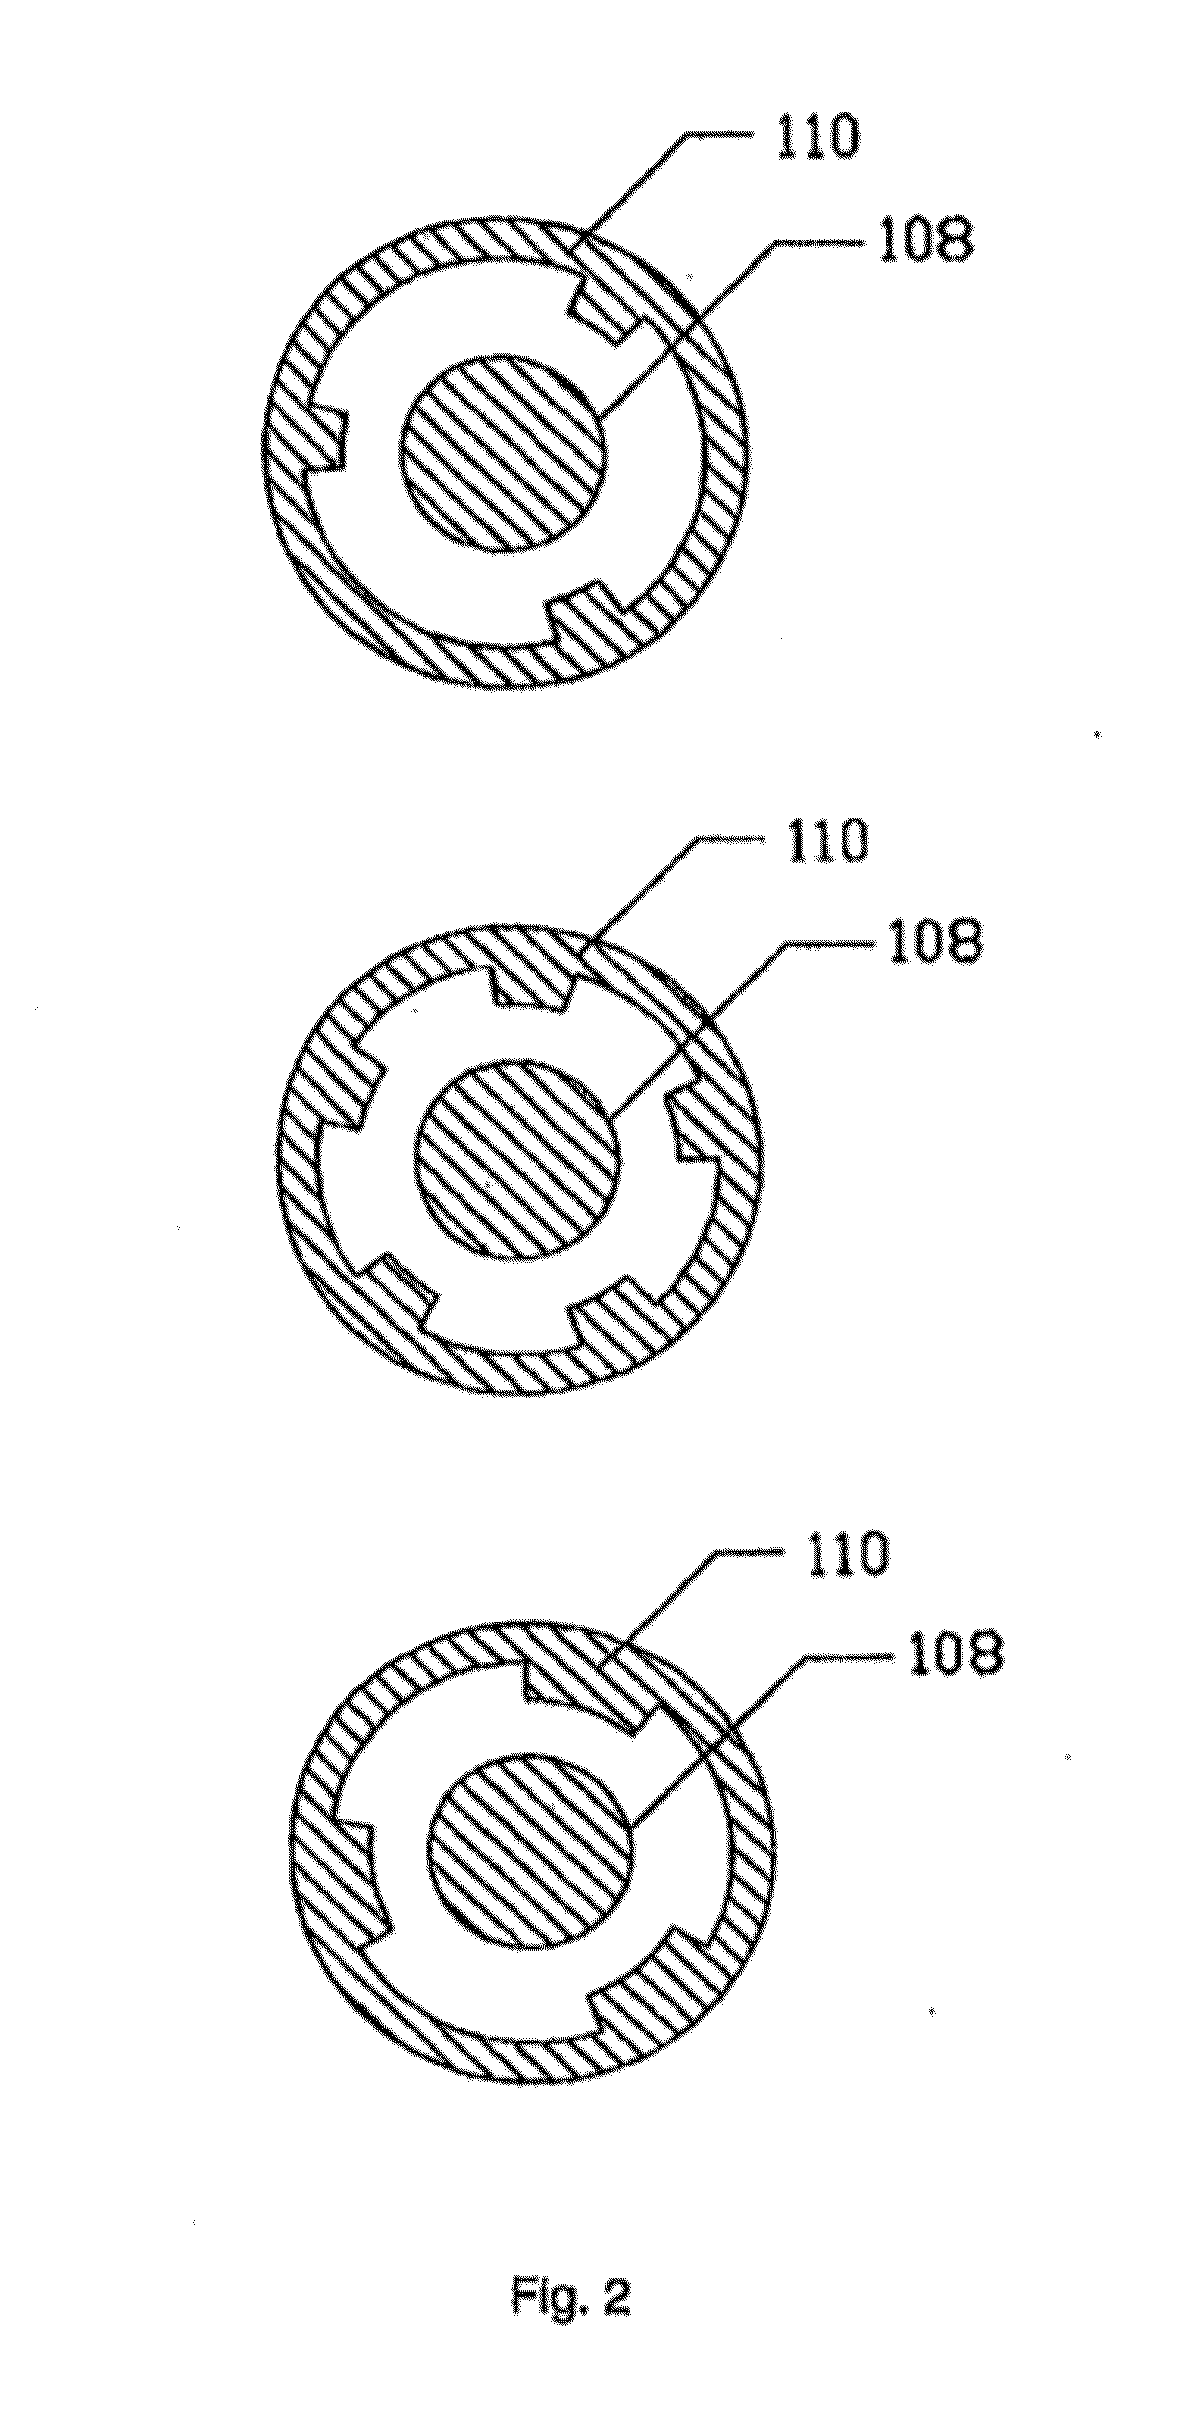 Apparatus and Method for Supplying Electrical Power to an Electrocrushing Drill